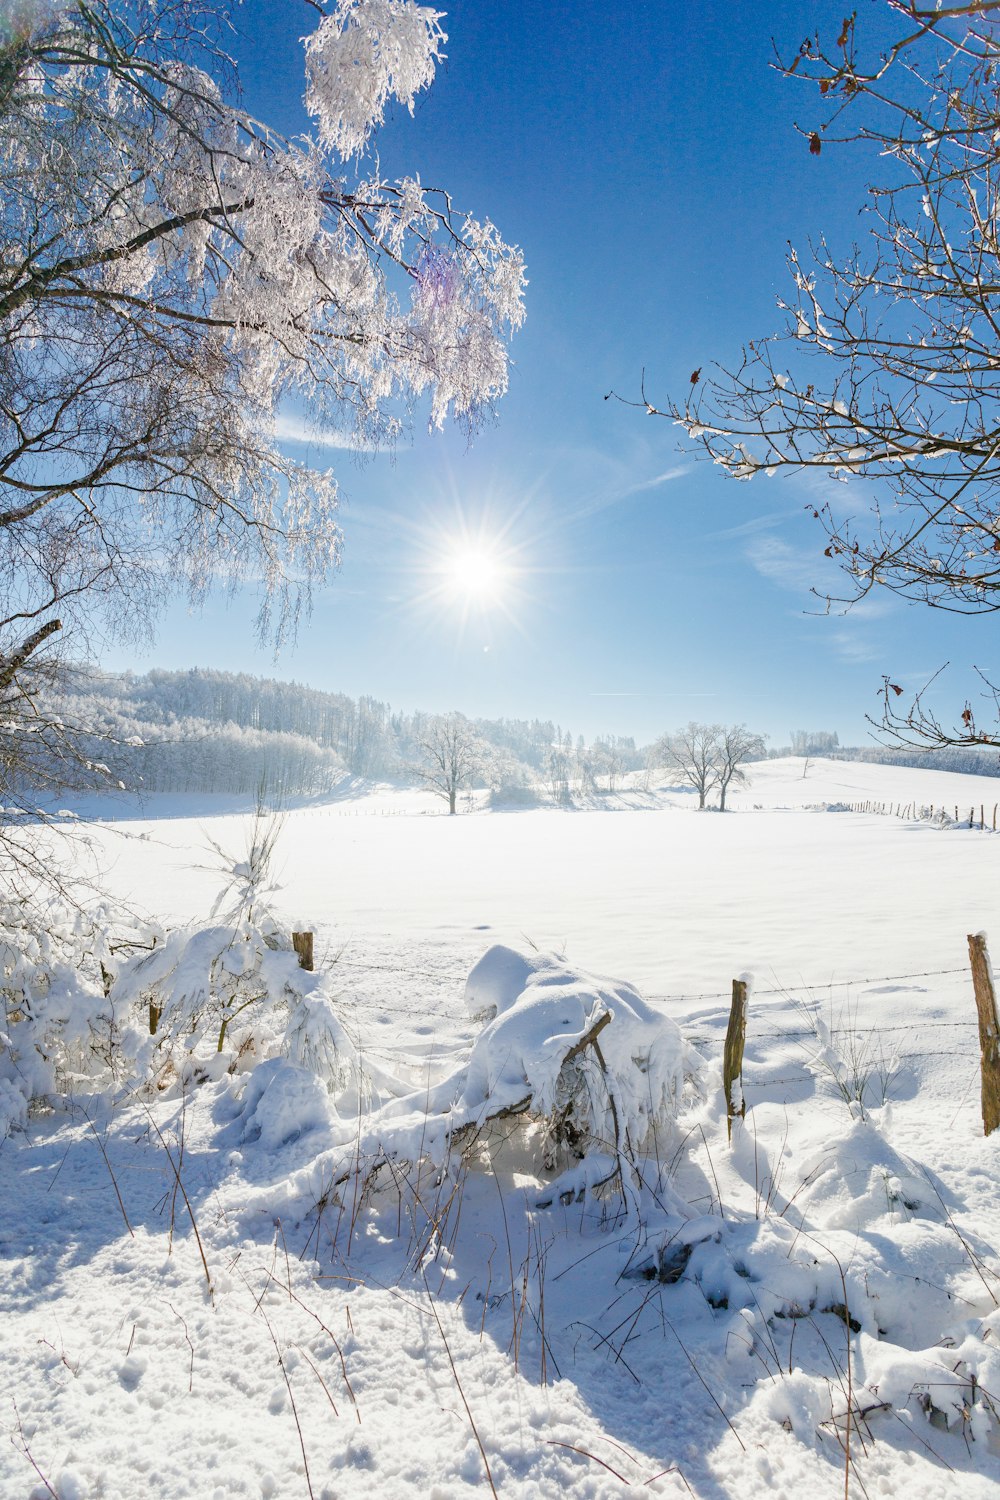 the sun shines brightly over a snowy field